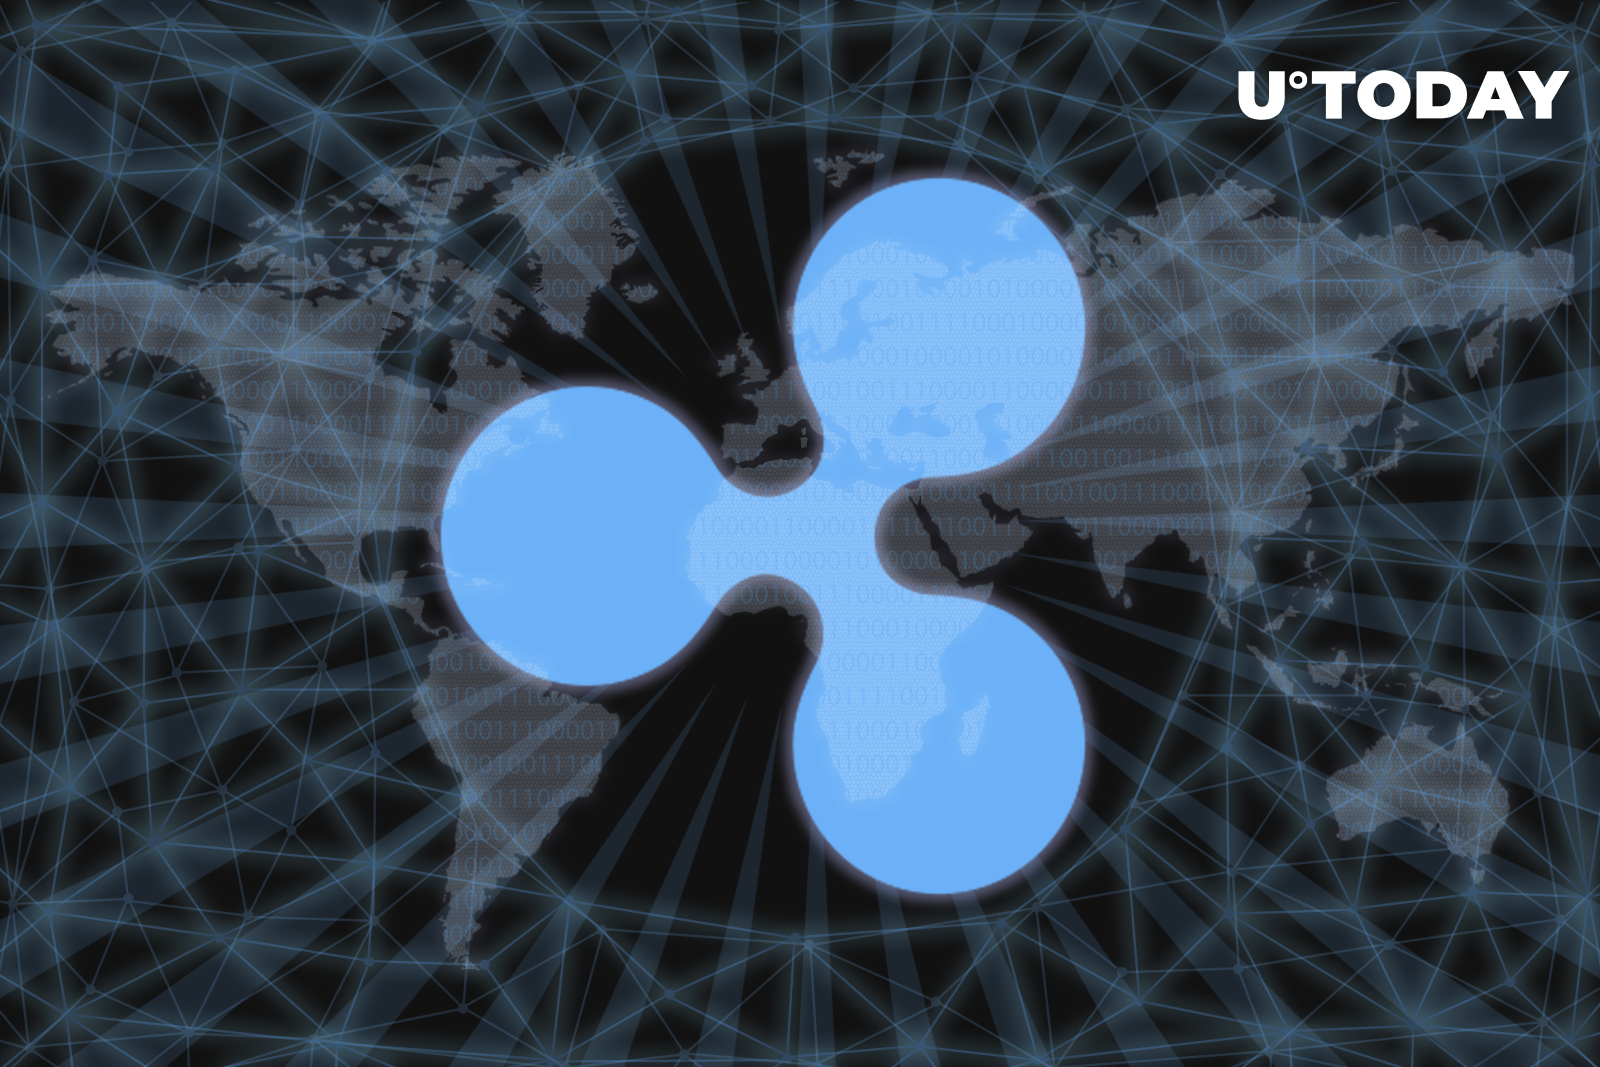 Ripple Sold 8 Million Worth of XRP in Q2